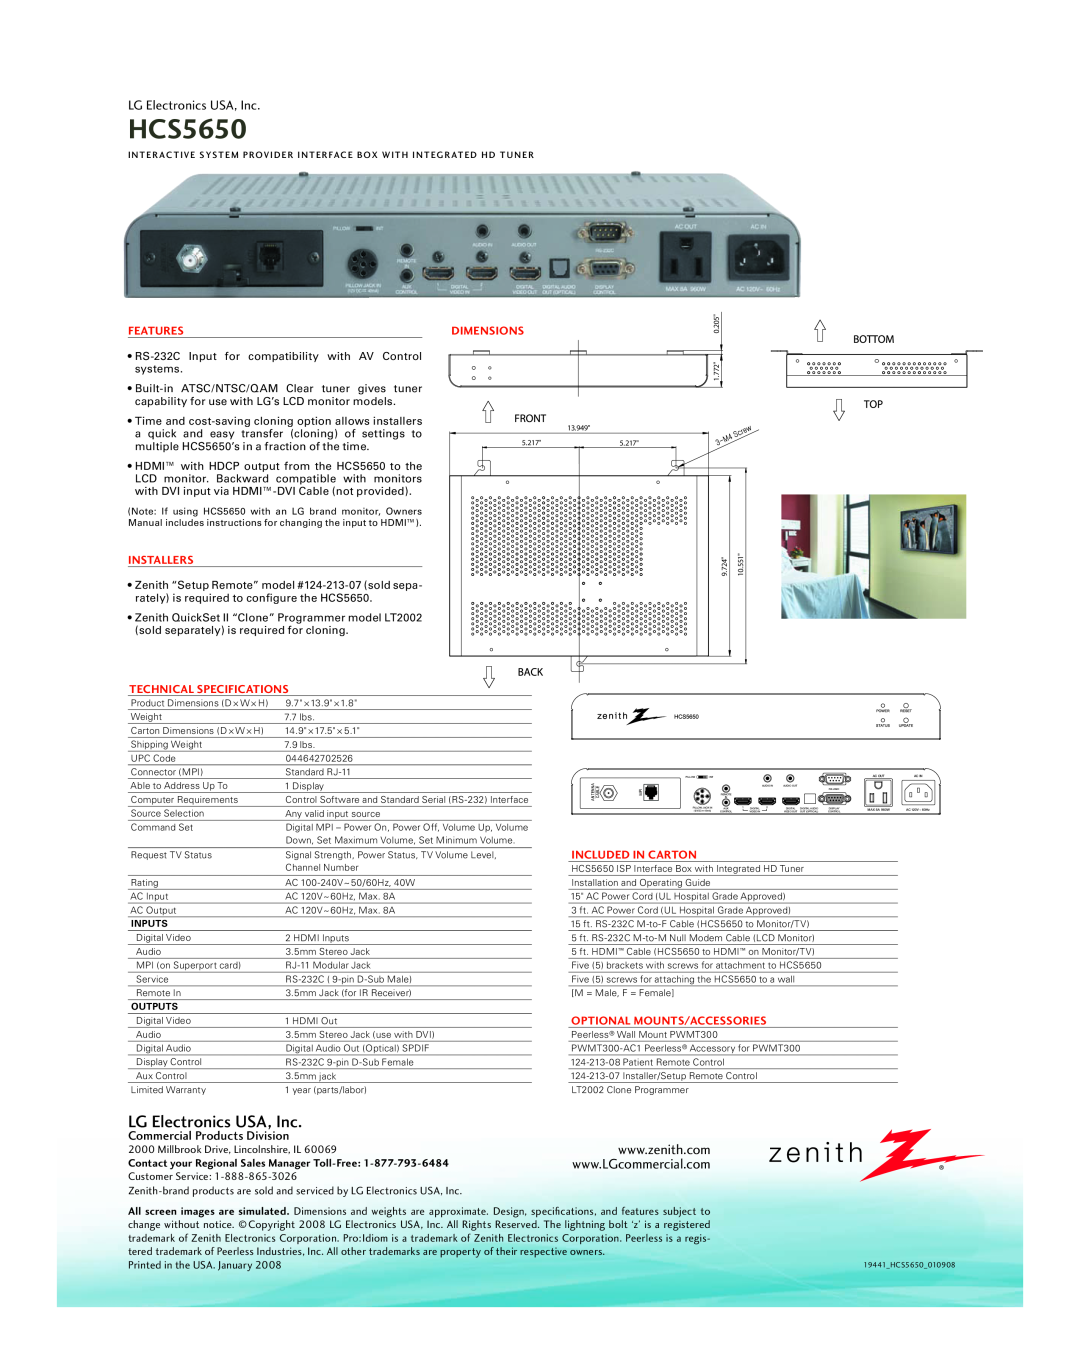 LG Electronics HCS5650 warranty LG Electronics USA, Inc, Commercial Products Division, Features, Installers, Dimensions 